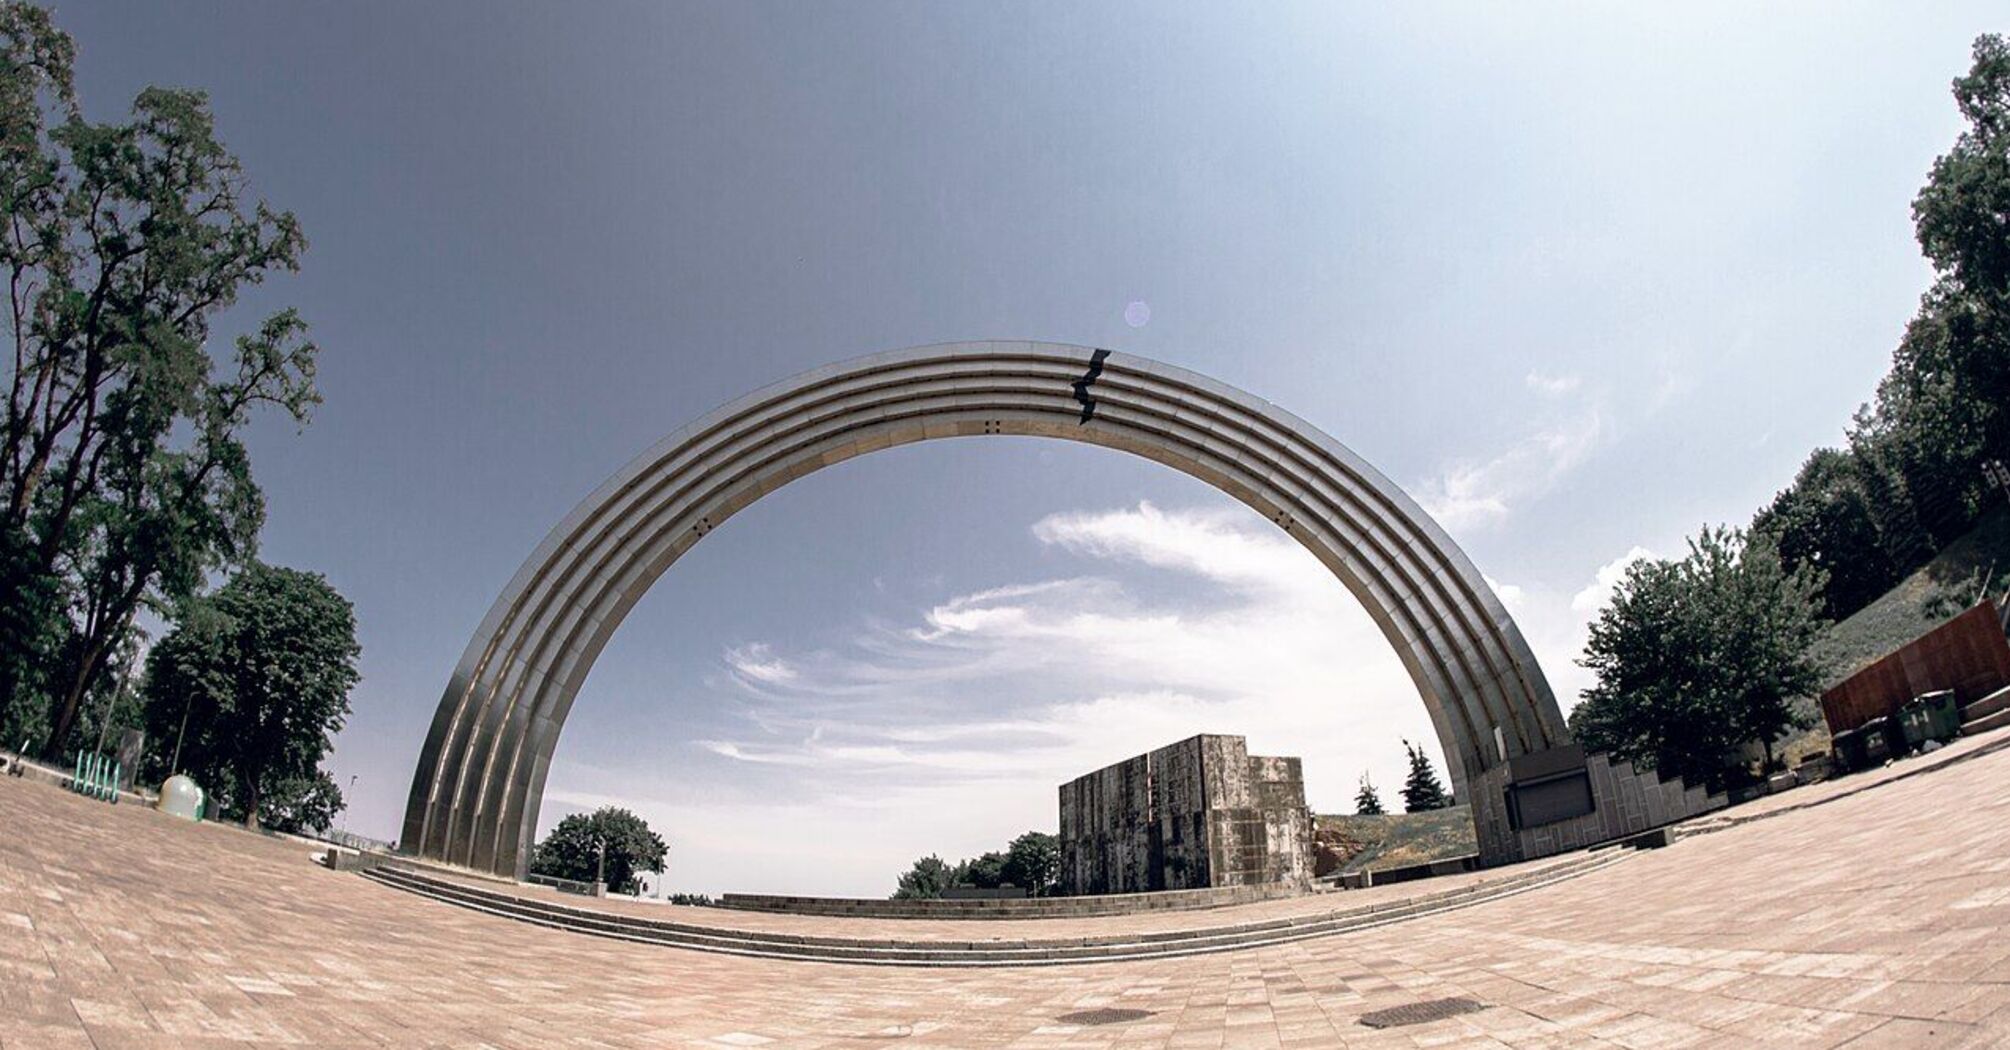 The Ministry of Culture deprived the Arch of the status of a historical monument